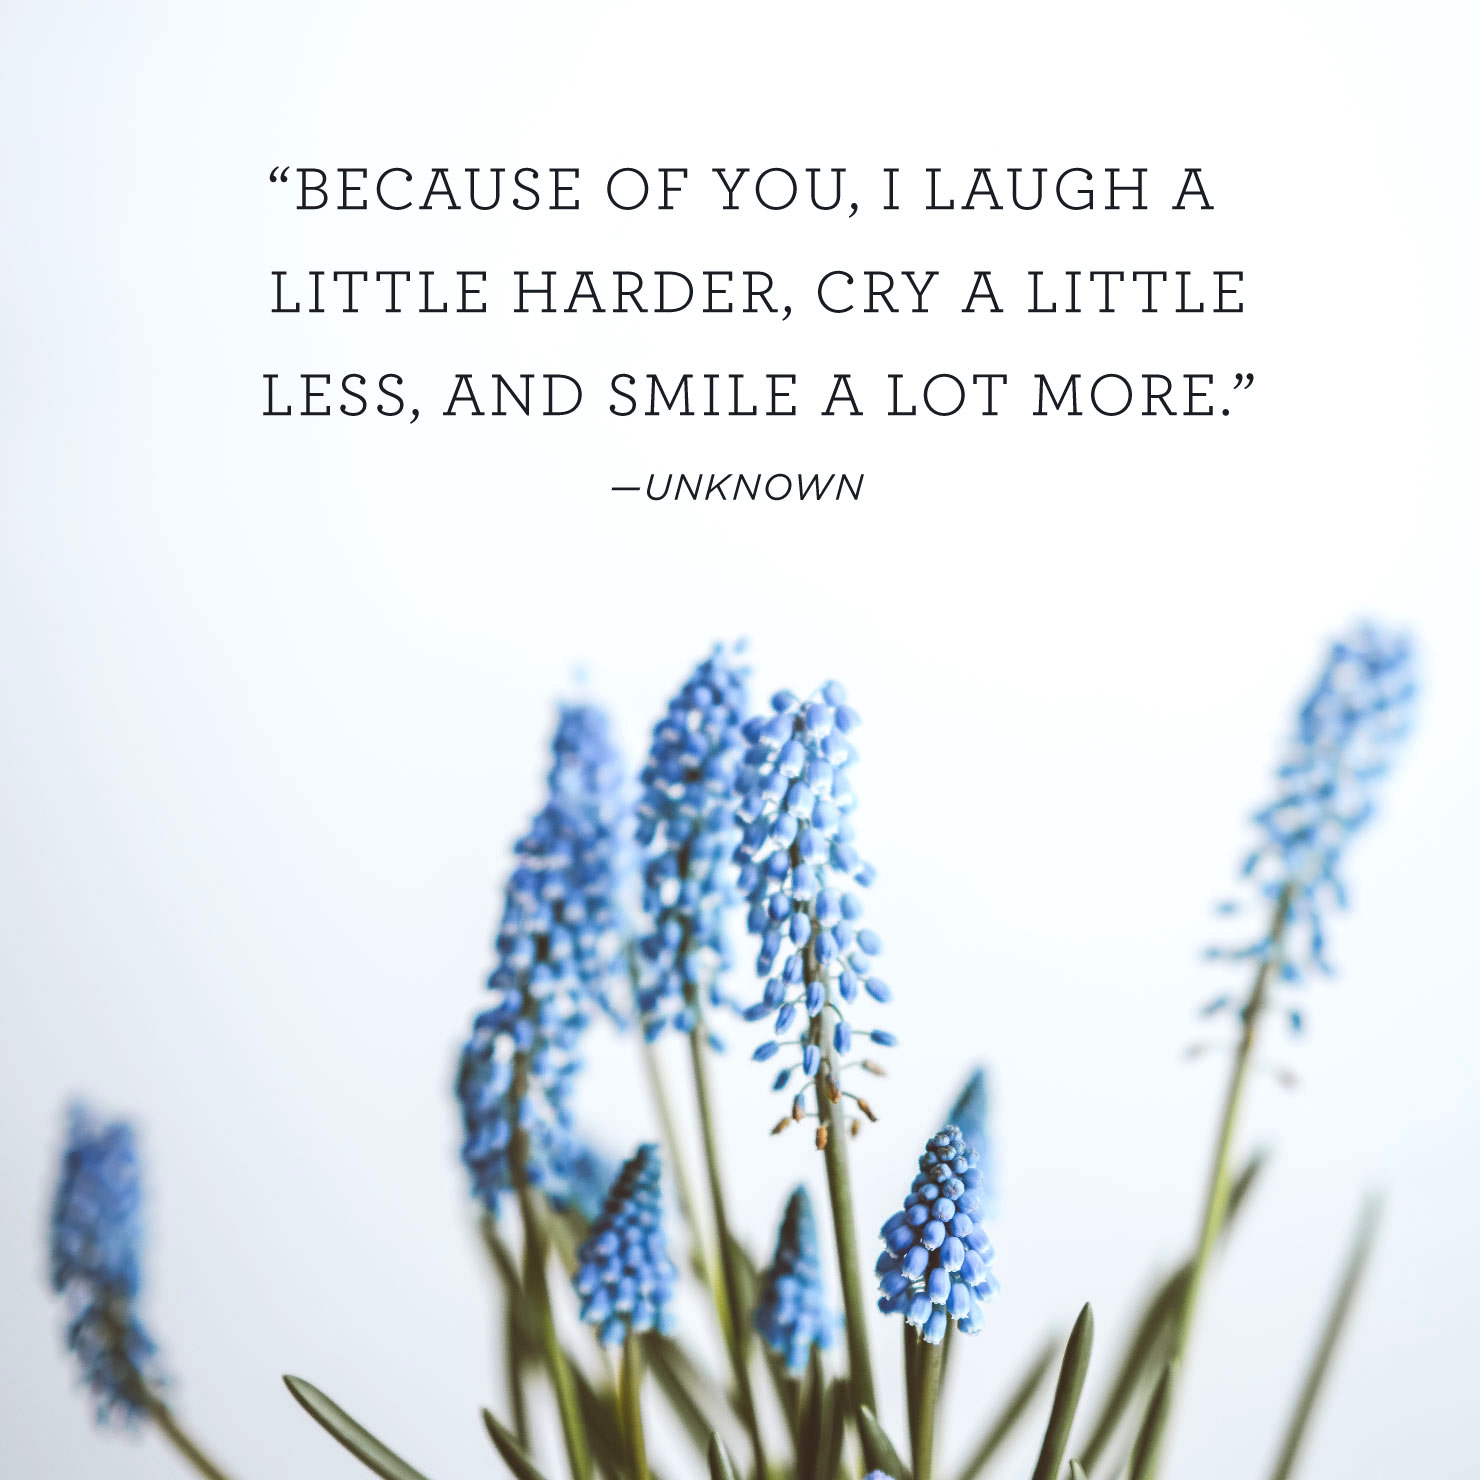 Quote above background image: 'Because of you, I laugh a little harder, cry a little less, and smile a lot more.' - Unknown